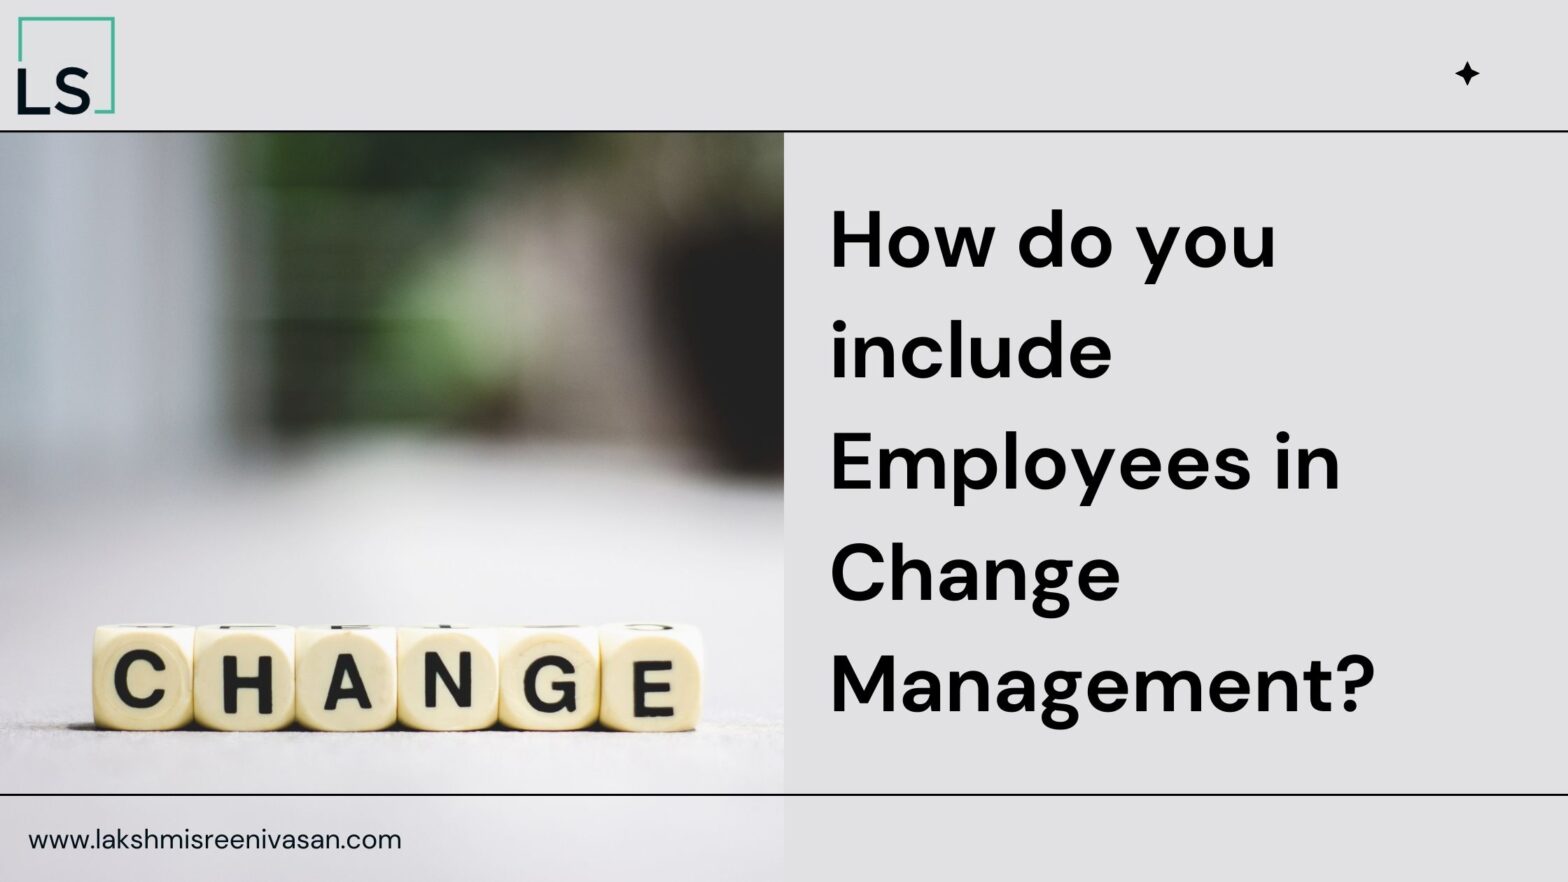 Employees in Change Management